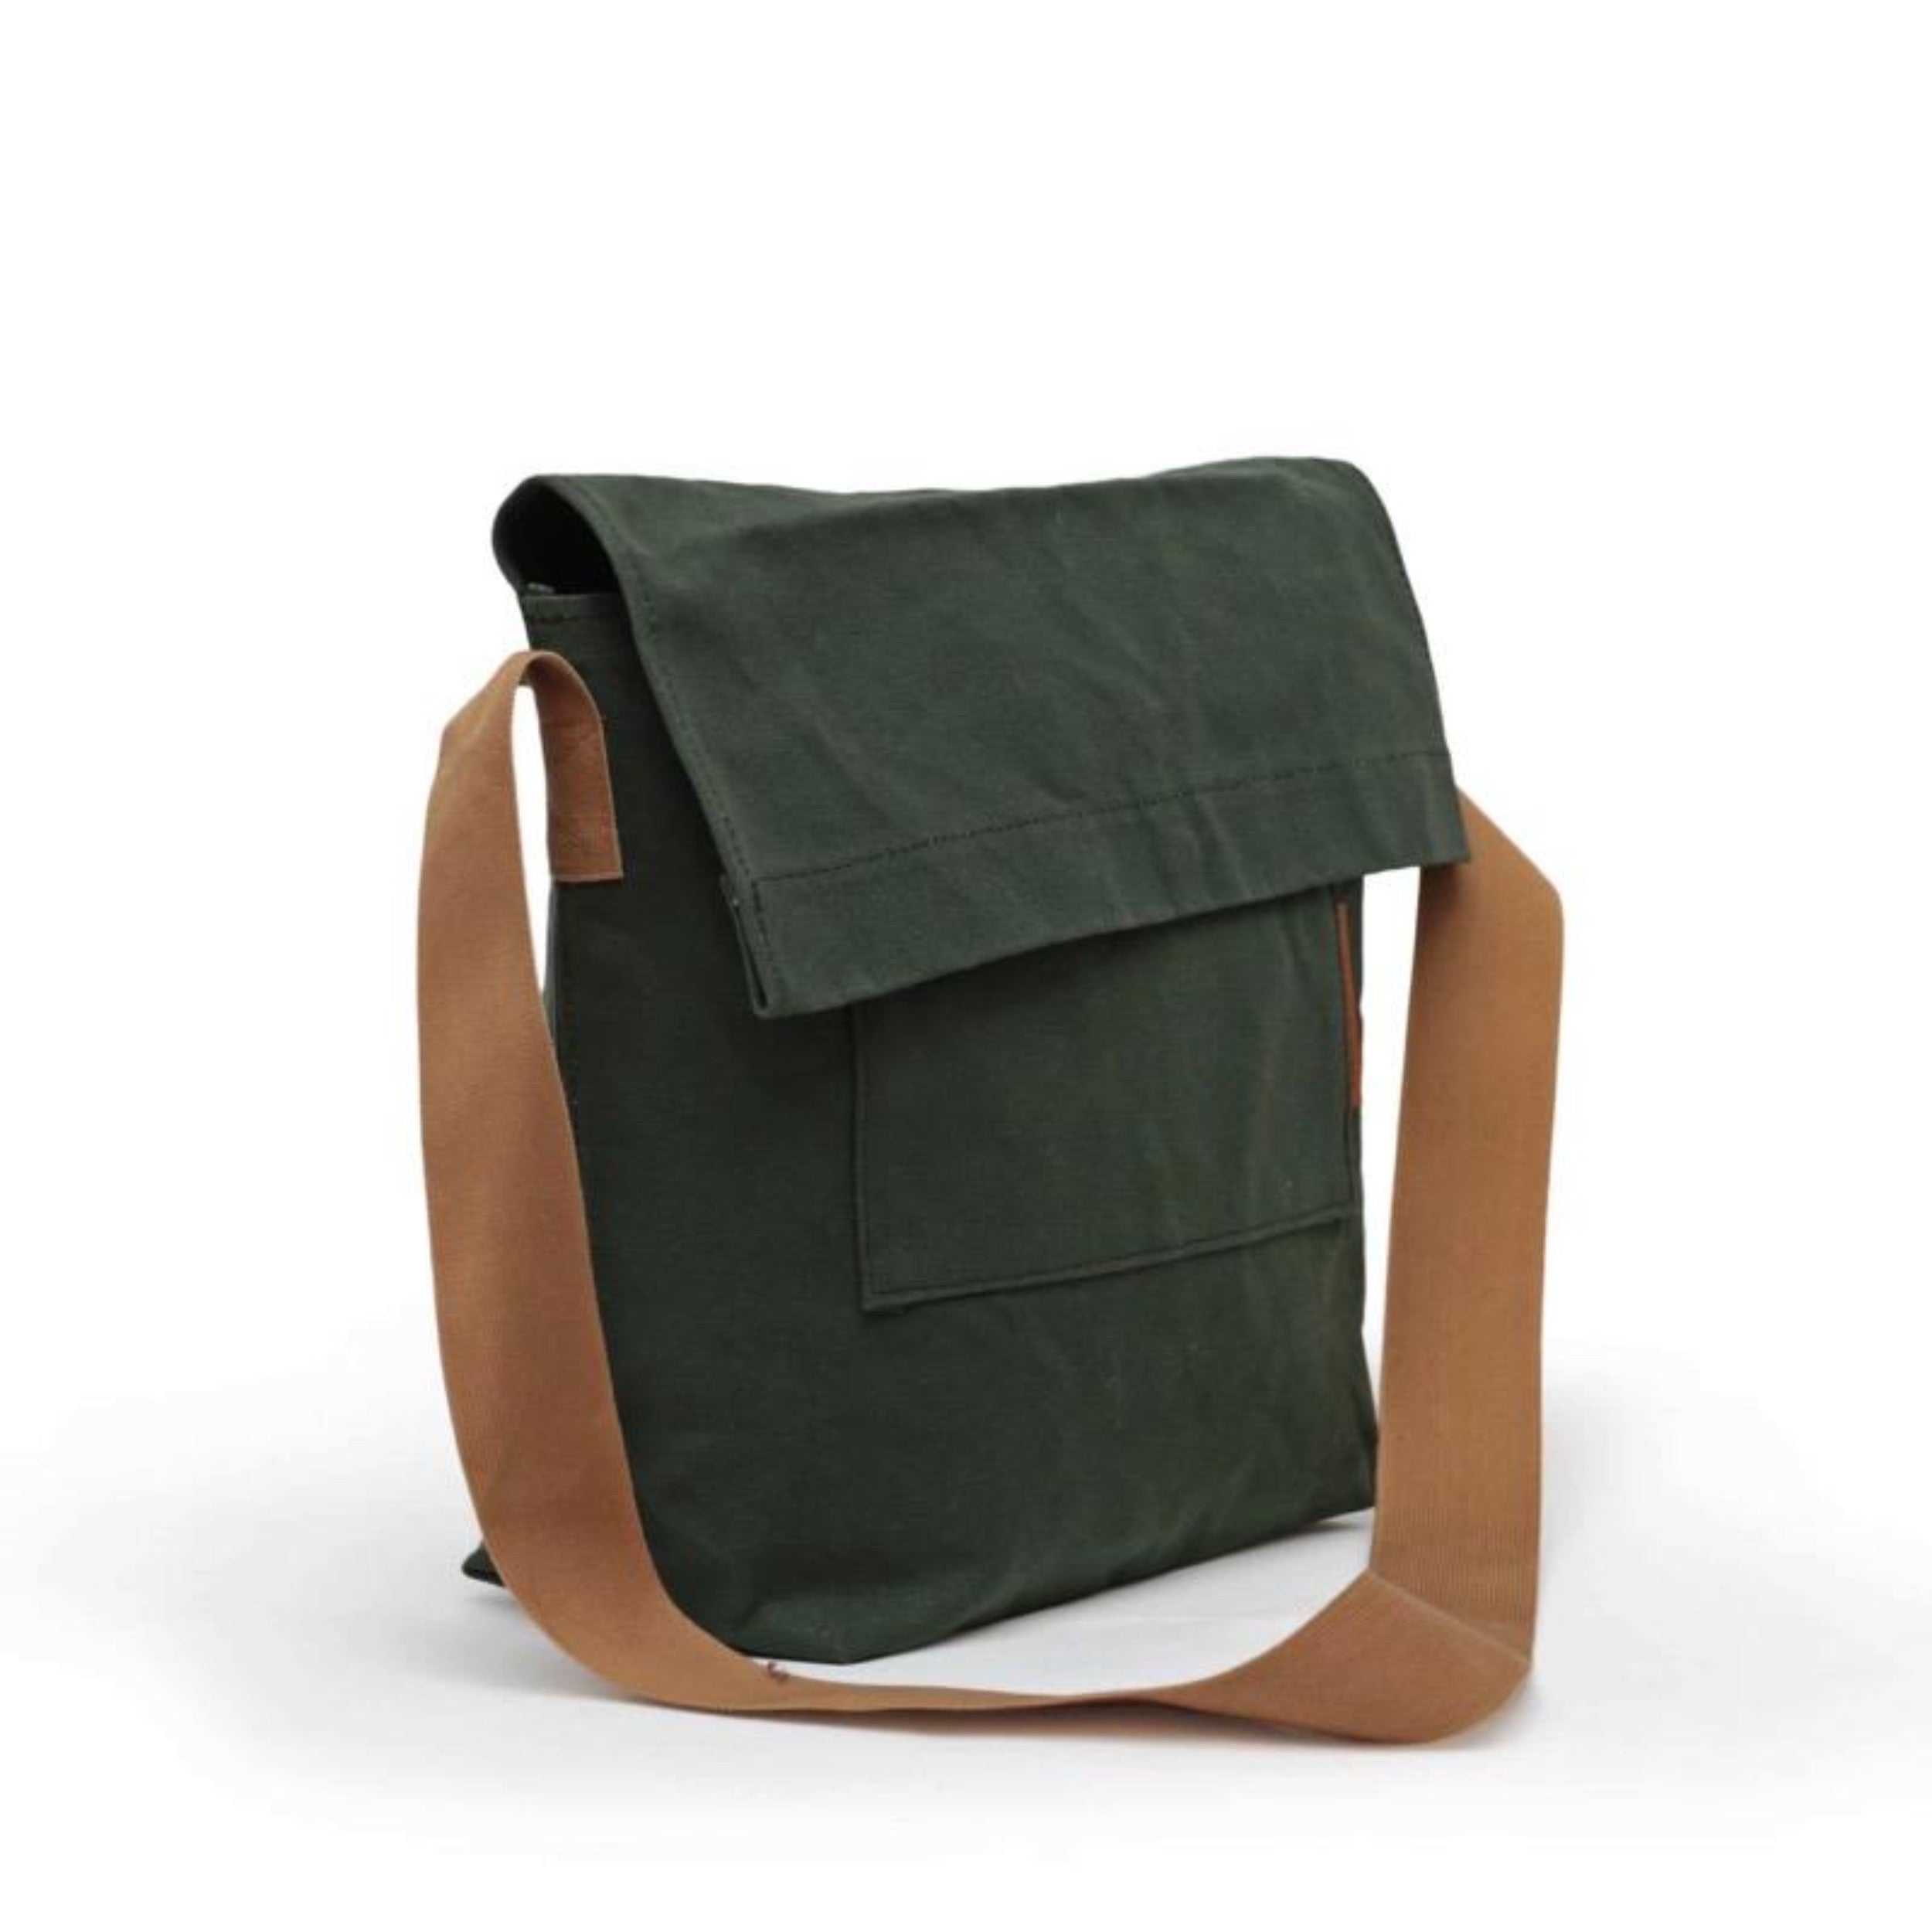 Carrier Company Satchel in Spruce Green